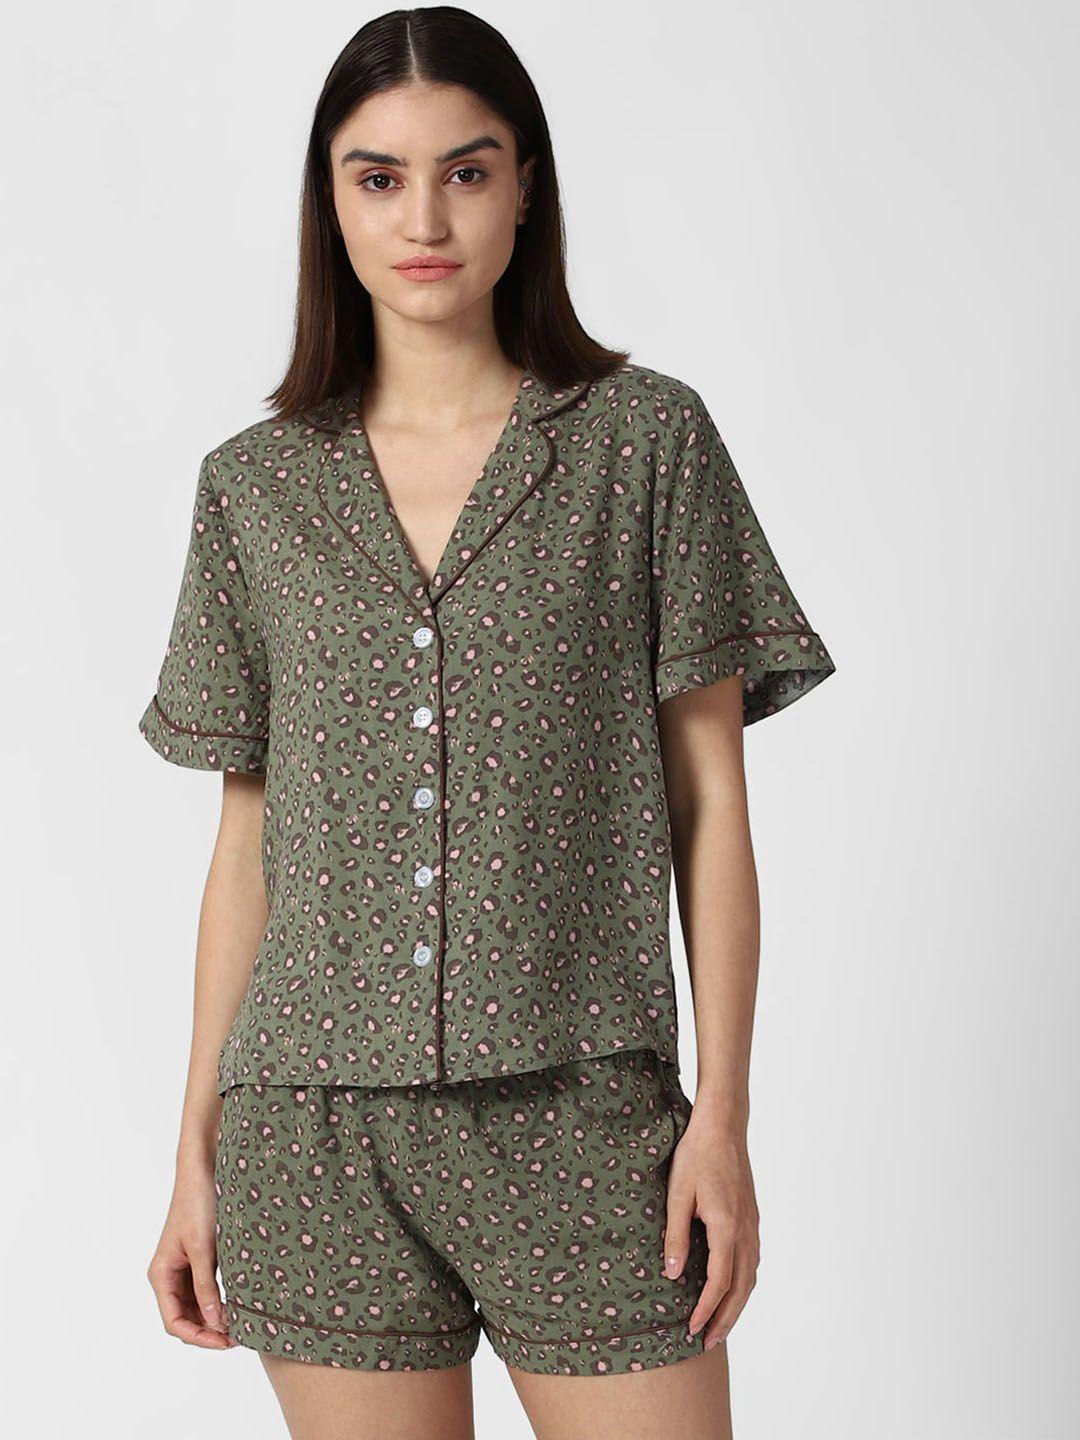 forever-21-women-olive-green-printed-night-suit